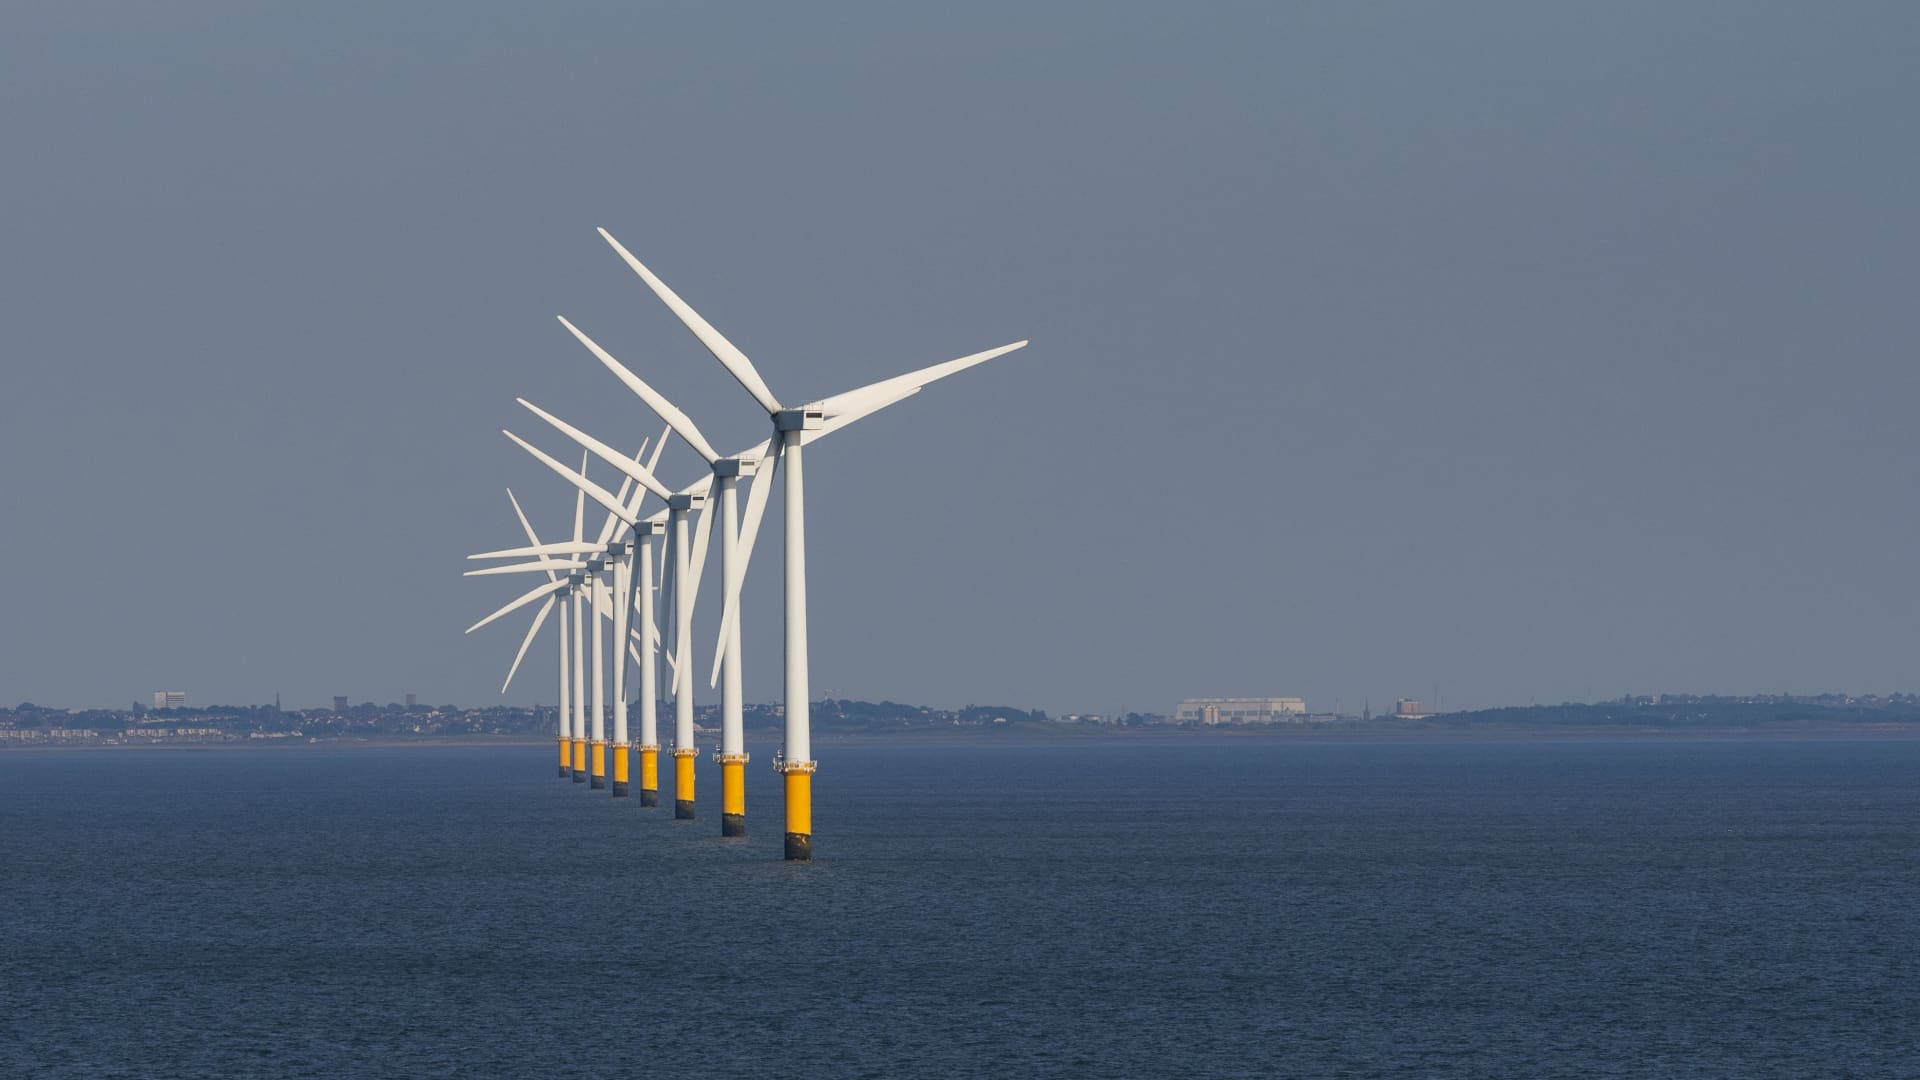 Burbo Bank, Liverpool Bay, England UK, Viewed from the sea turbines on Burbo wind farm off the UK coast. (Photo by: Peter Titmuss/UCG/Universal Images Group via Getty Images)